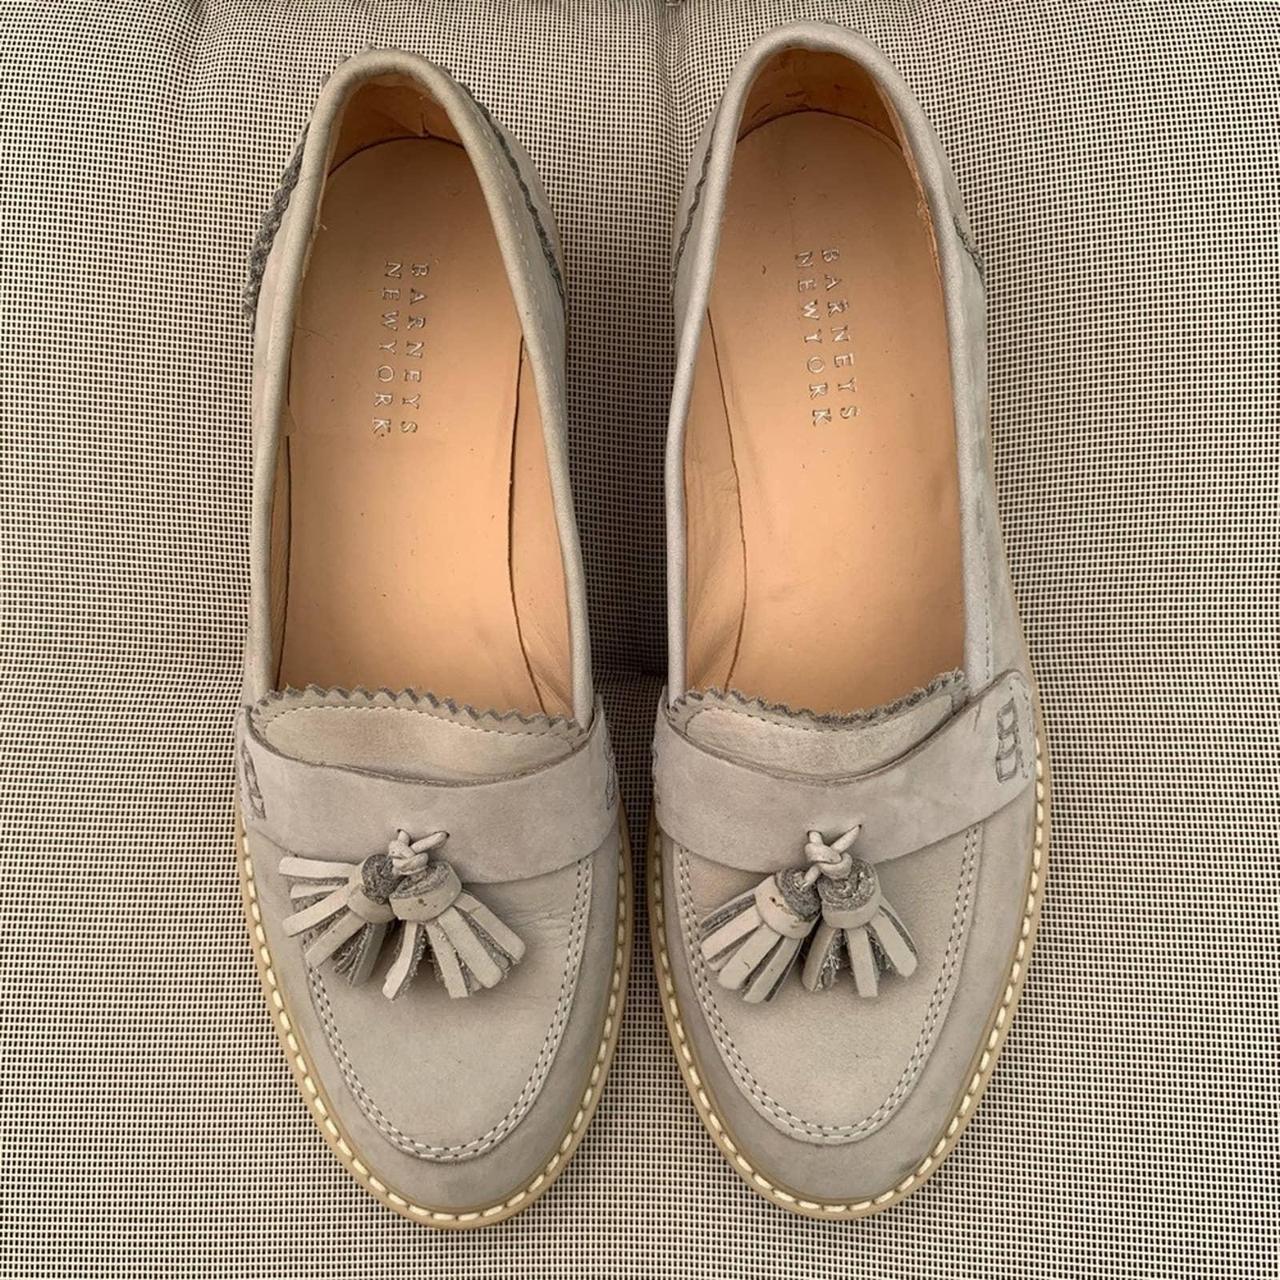 Barney's Women's Grey and Cream Loafers